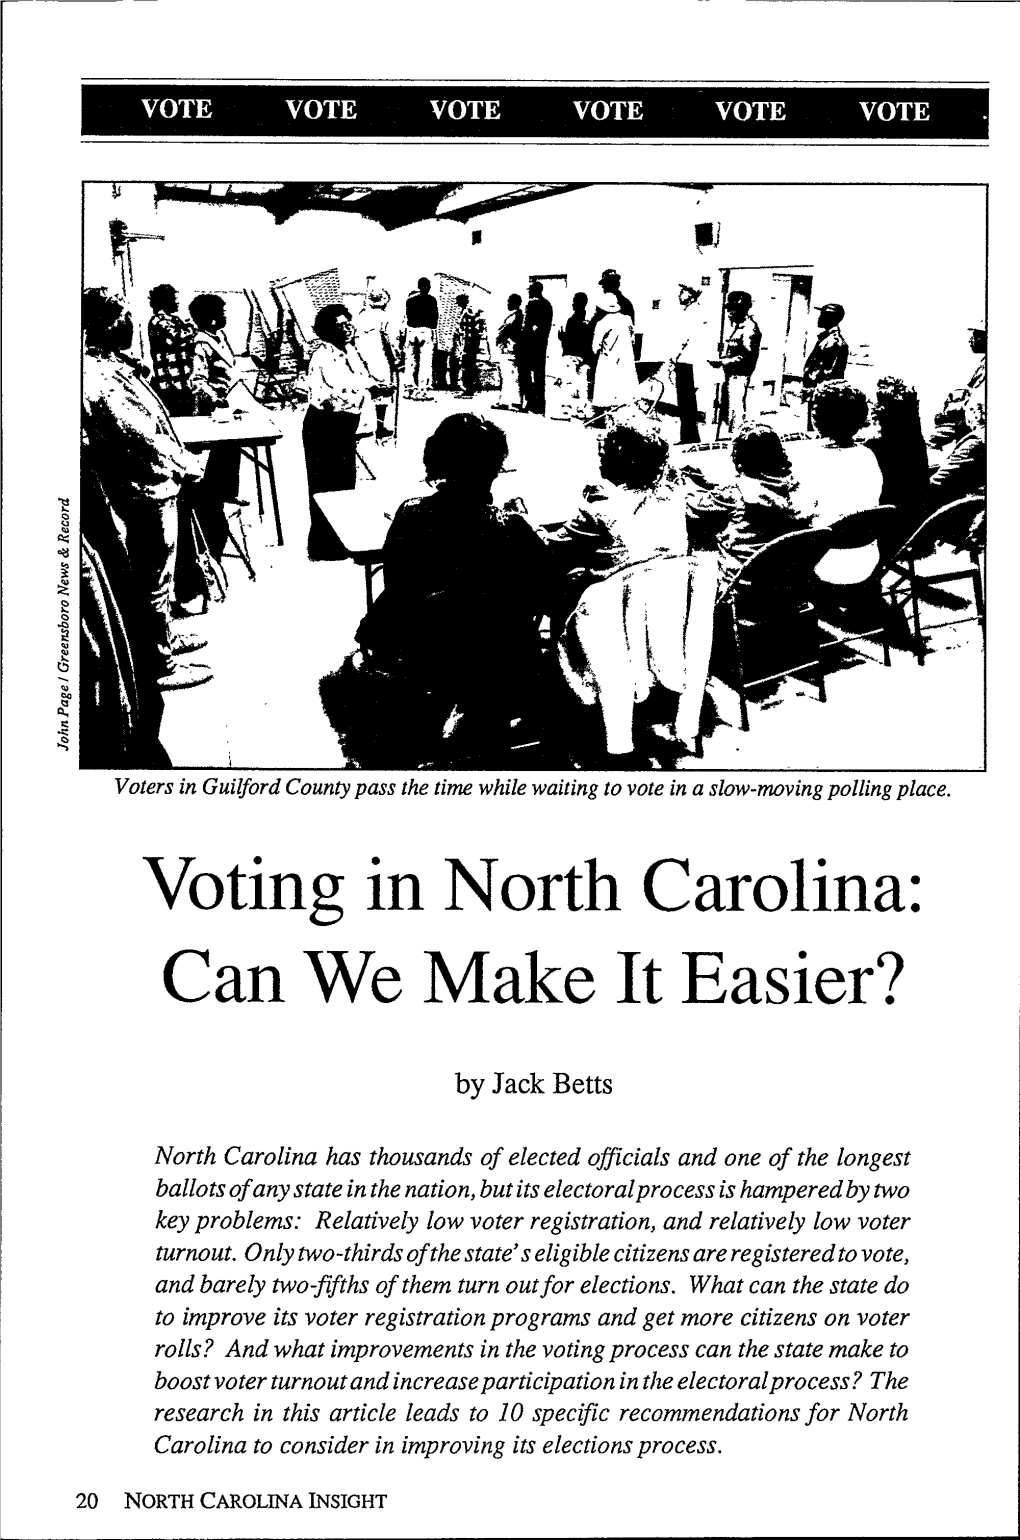 Voting in North Carolina: Can We Make It Easier?